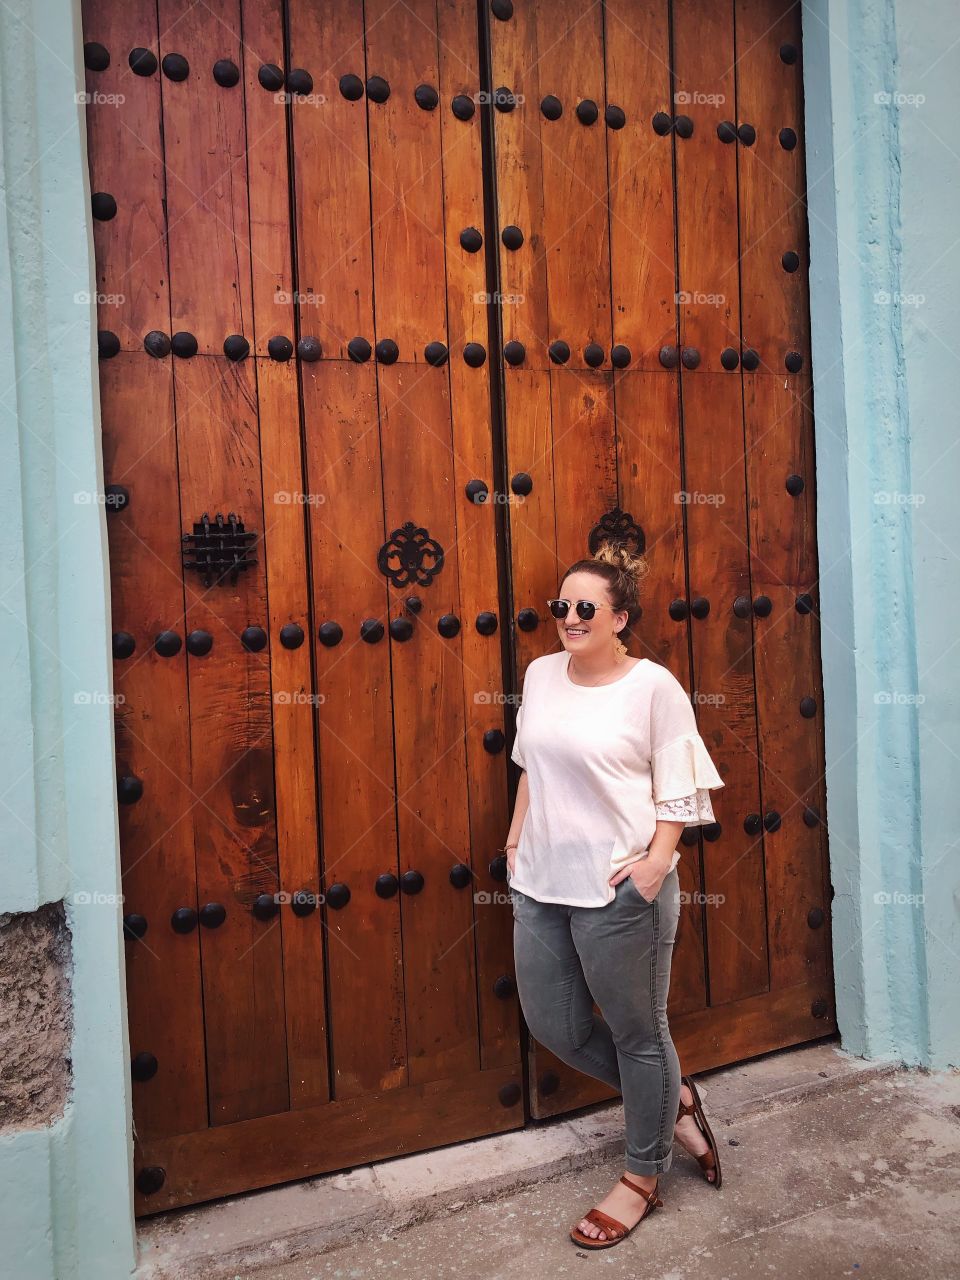 If you’re looking for colorful backdrops and gorgeous old doorways, look no further than Havana, Cuba.